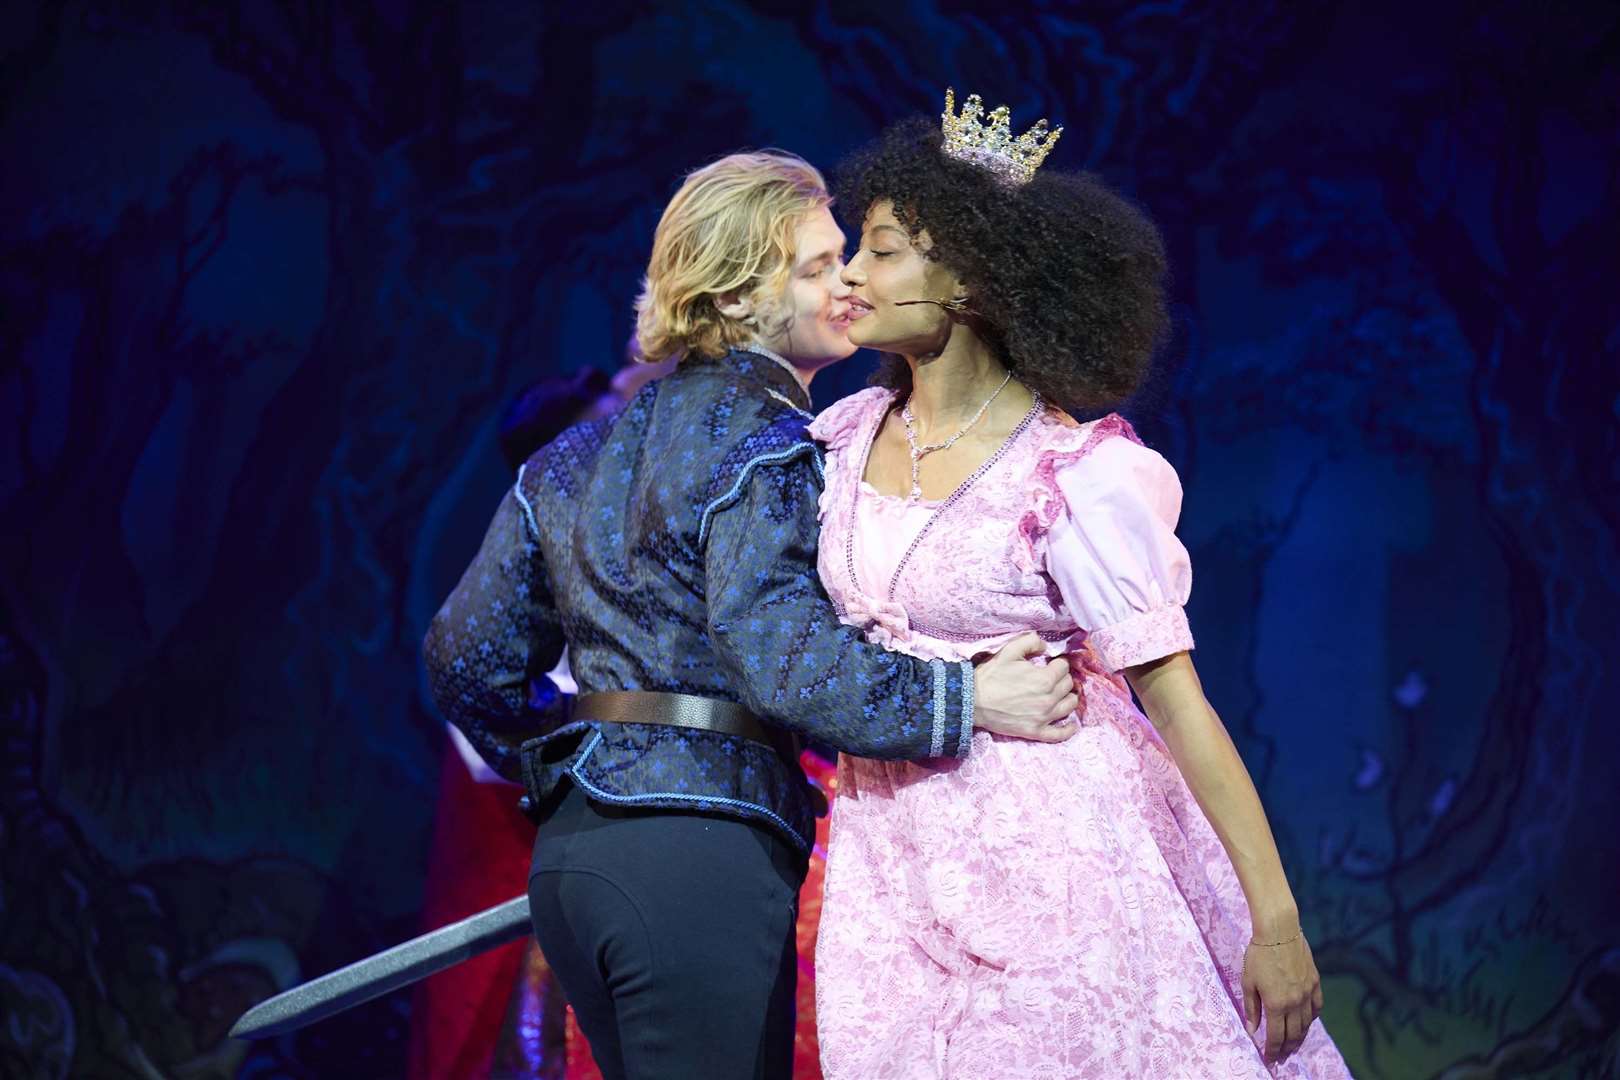 Ben is currently appearing as the prince in Sleeping Beauty at Eden Court. Picture: Ewen Weatherspoon